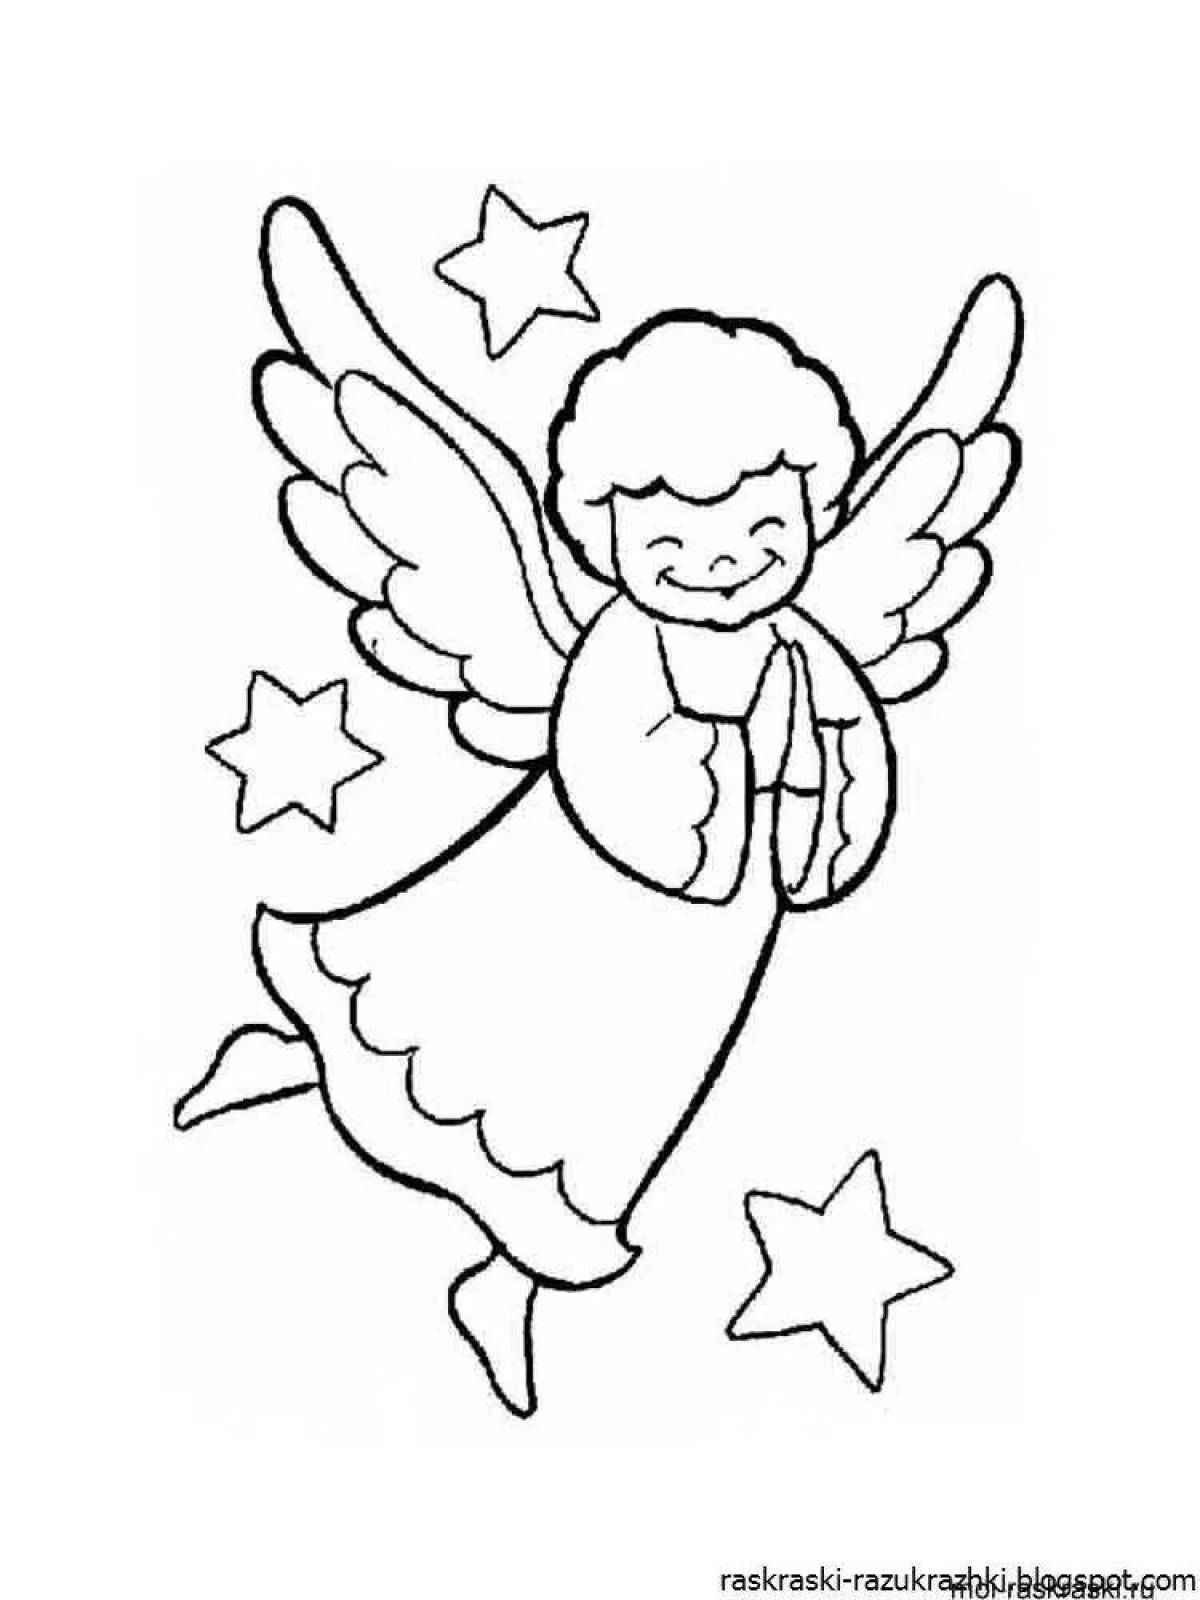 Sky-inspired angel coloring book for kids